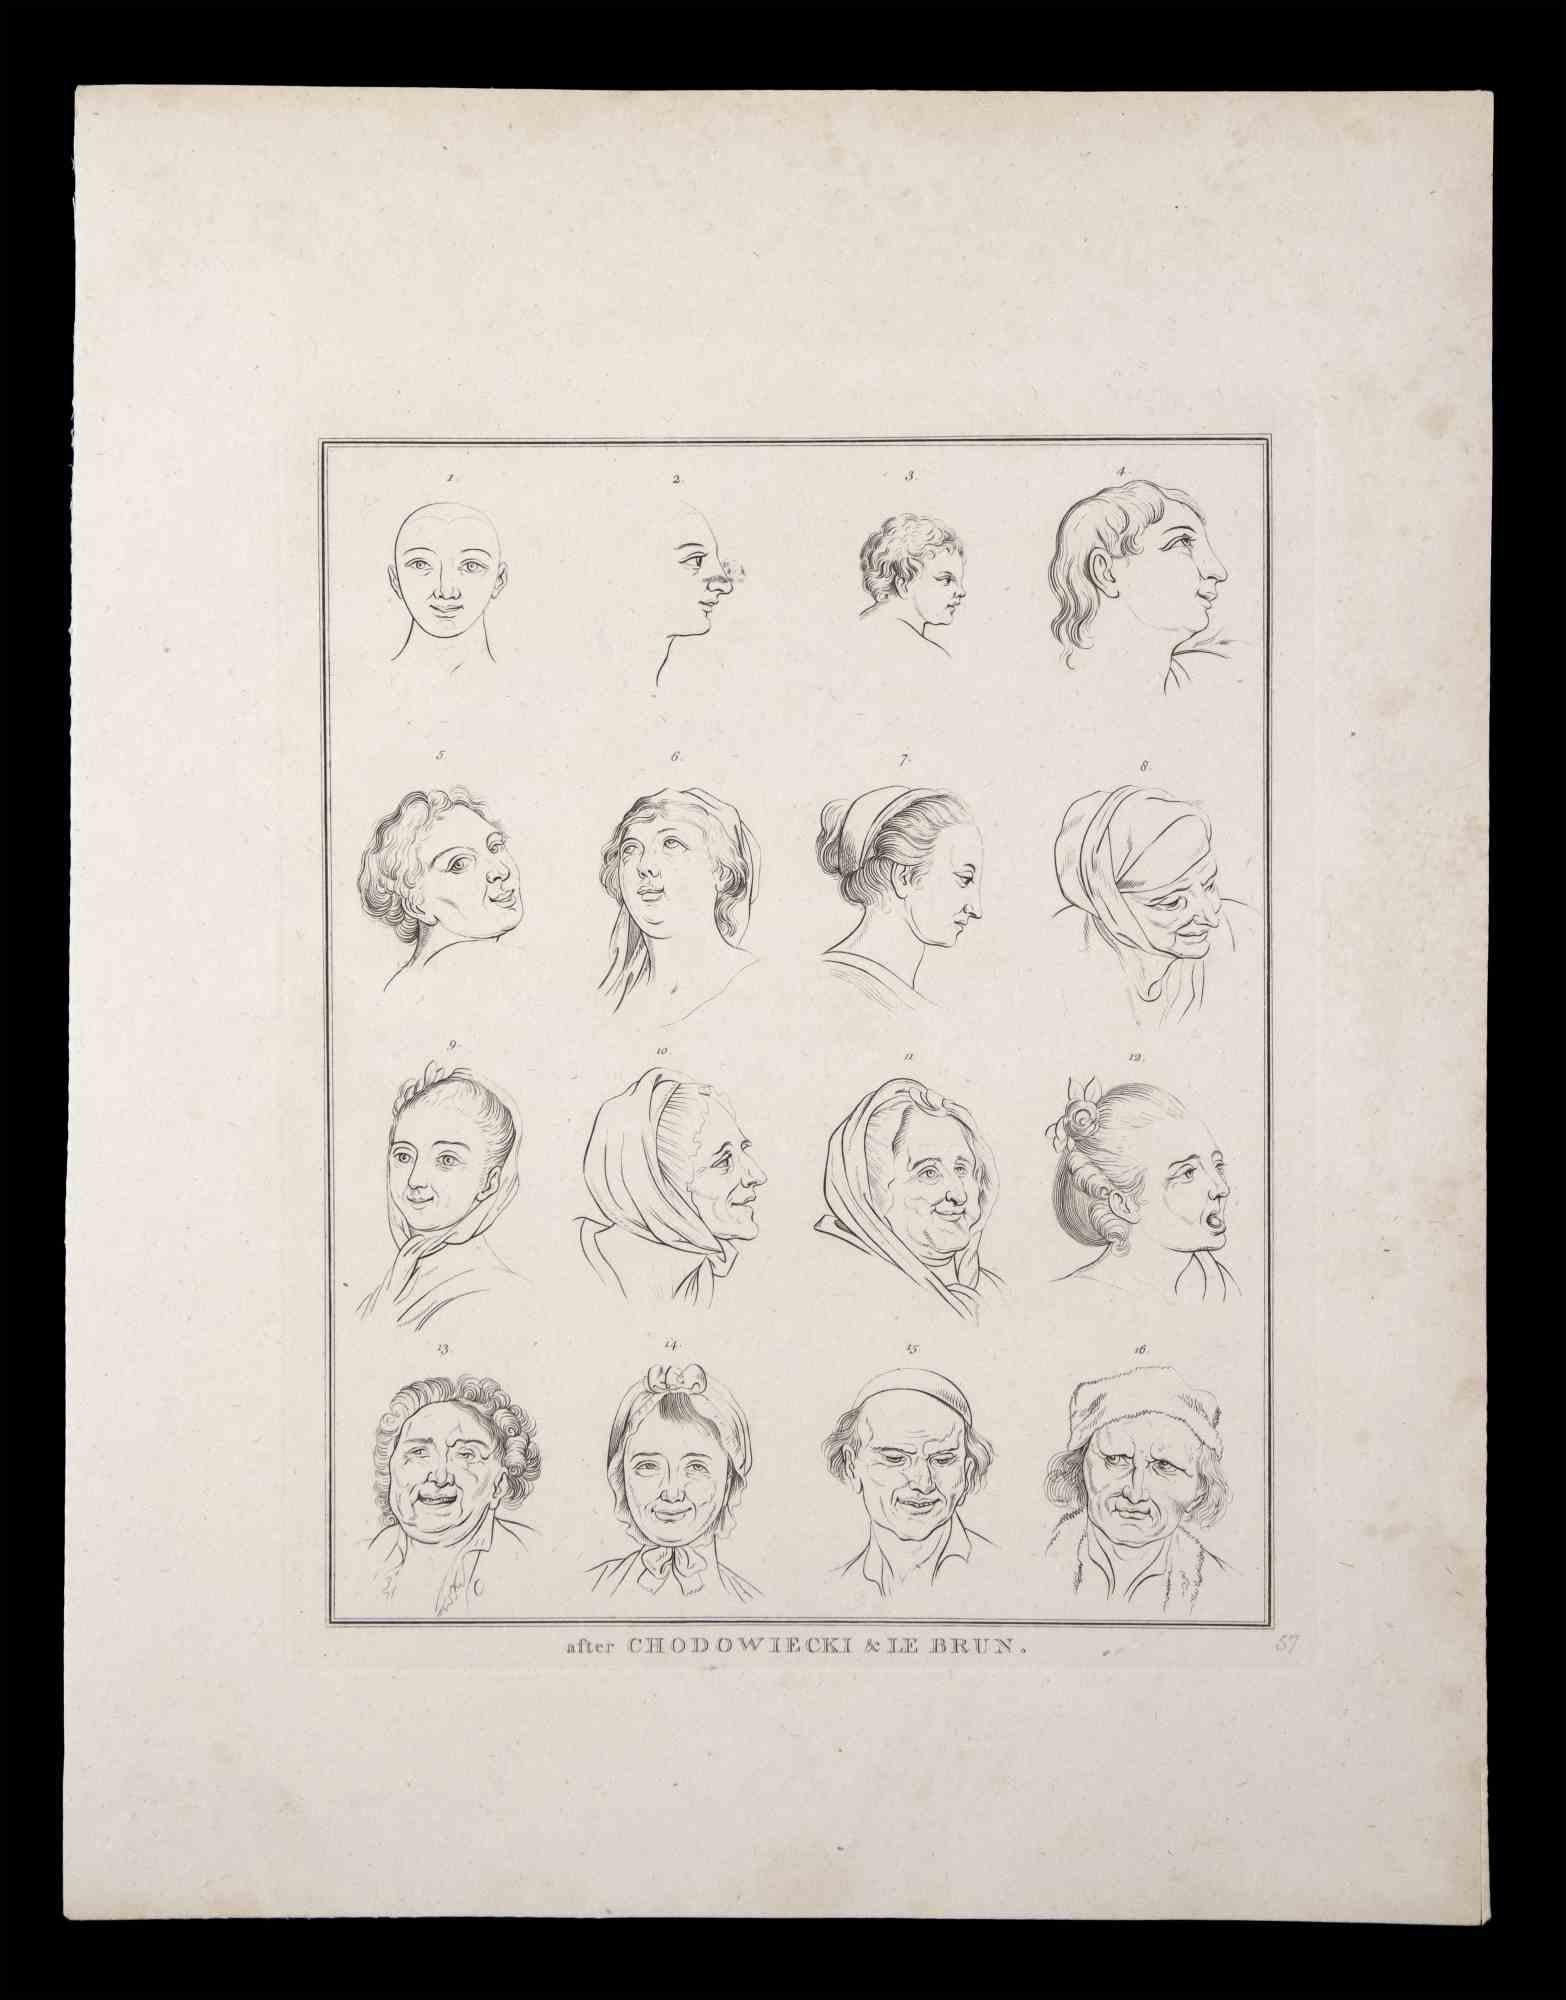 Portraits of men and women is an original etching artwork realized by Thomas Holloway after Lebrun and Chodowiecki for Johann Caspar Lavater's "Essays on Physiognomy, Designed to Promote the Knowledge and the Love of Mankind", London, Bensley, 1810.